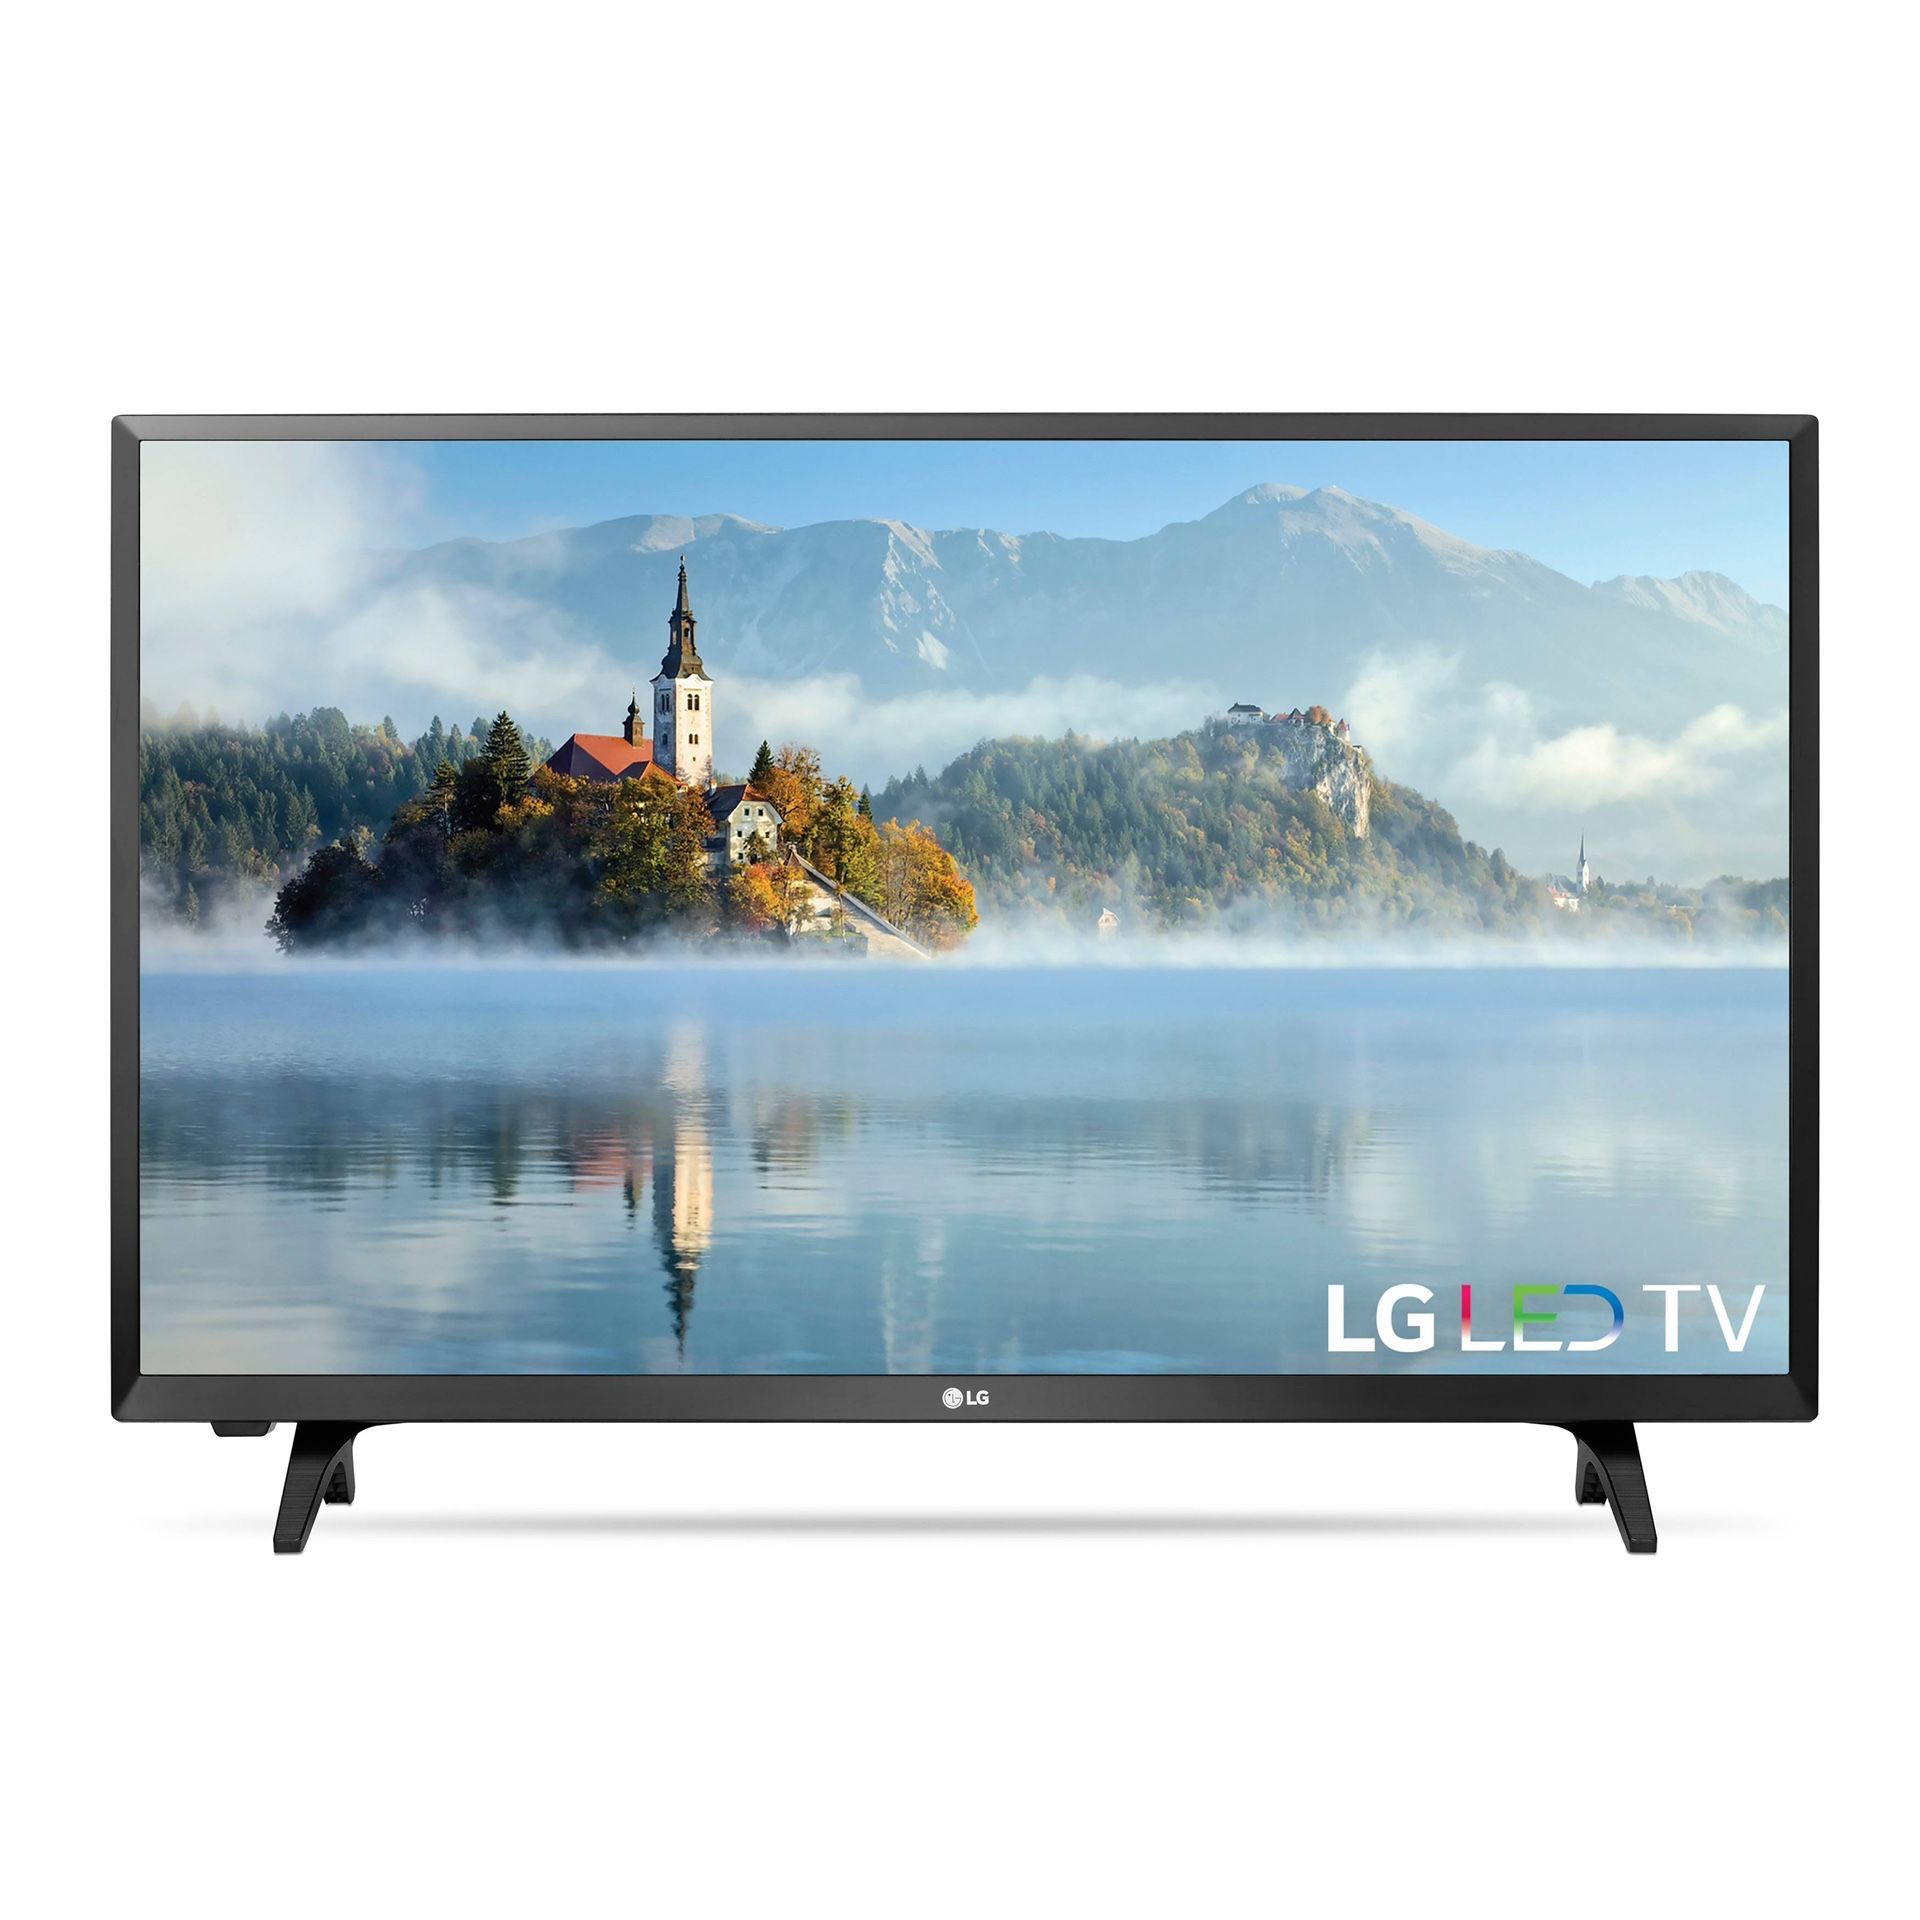 LG 32” LED TV (w/ Remote And HDMI Cable)